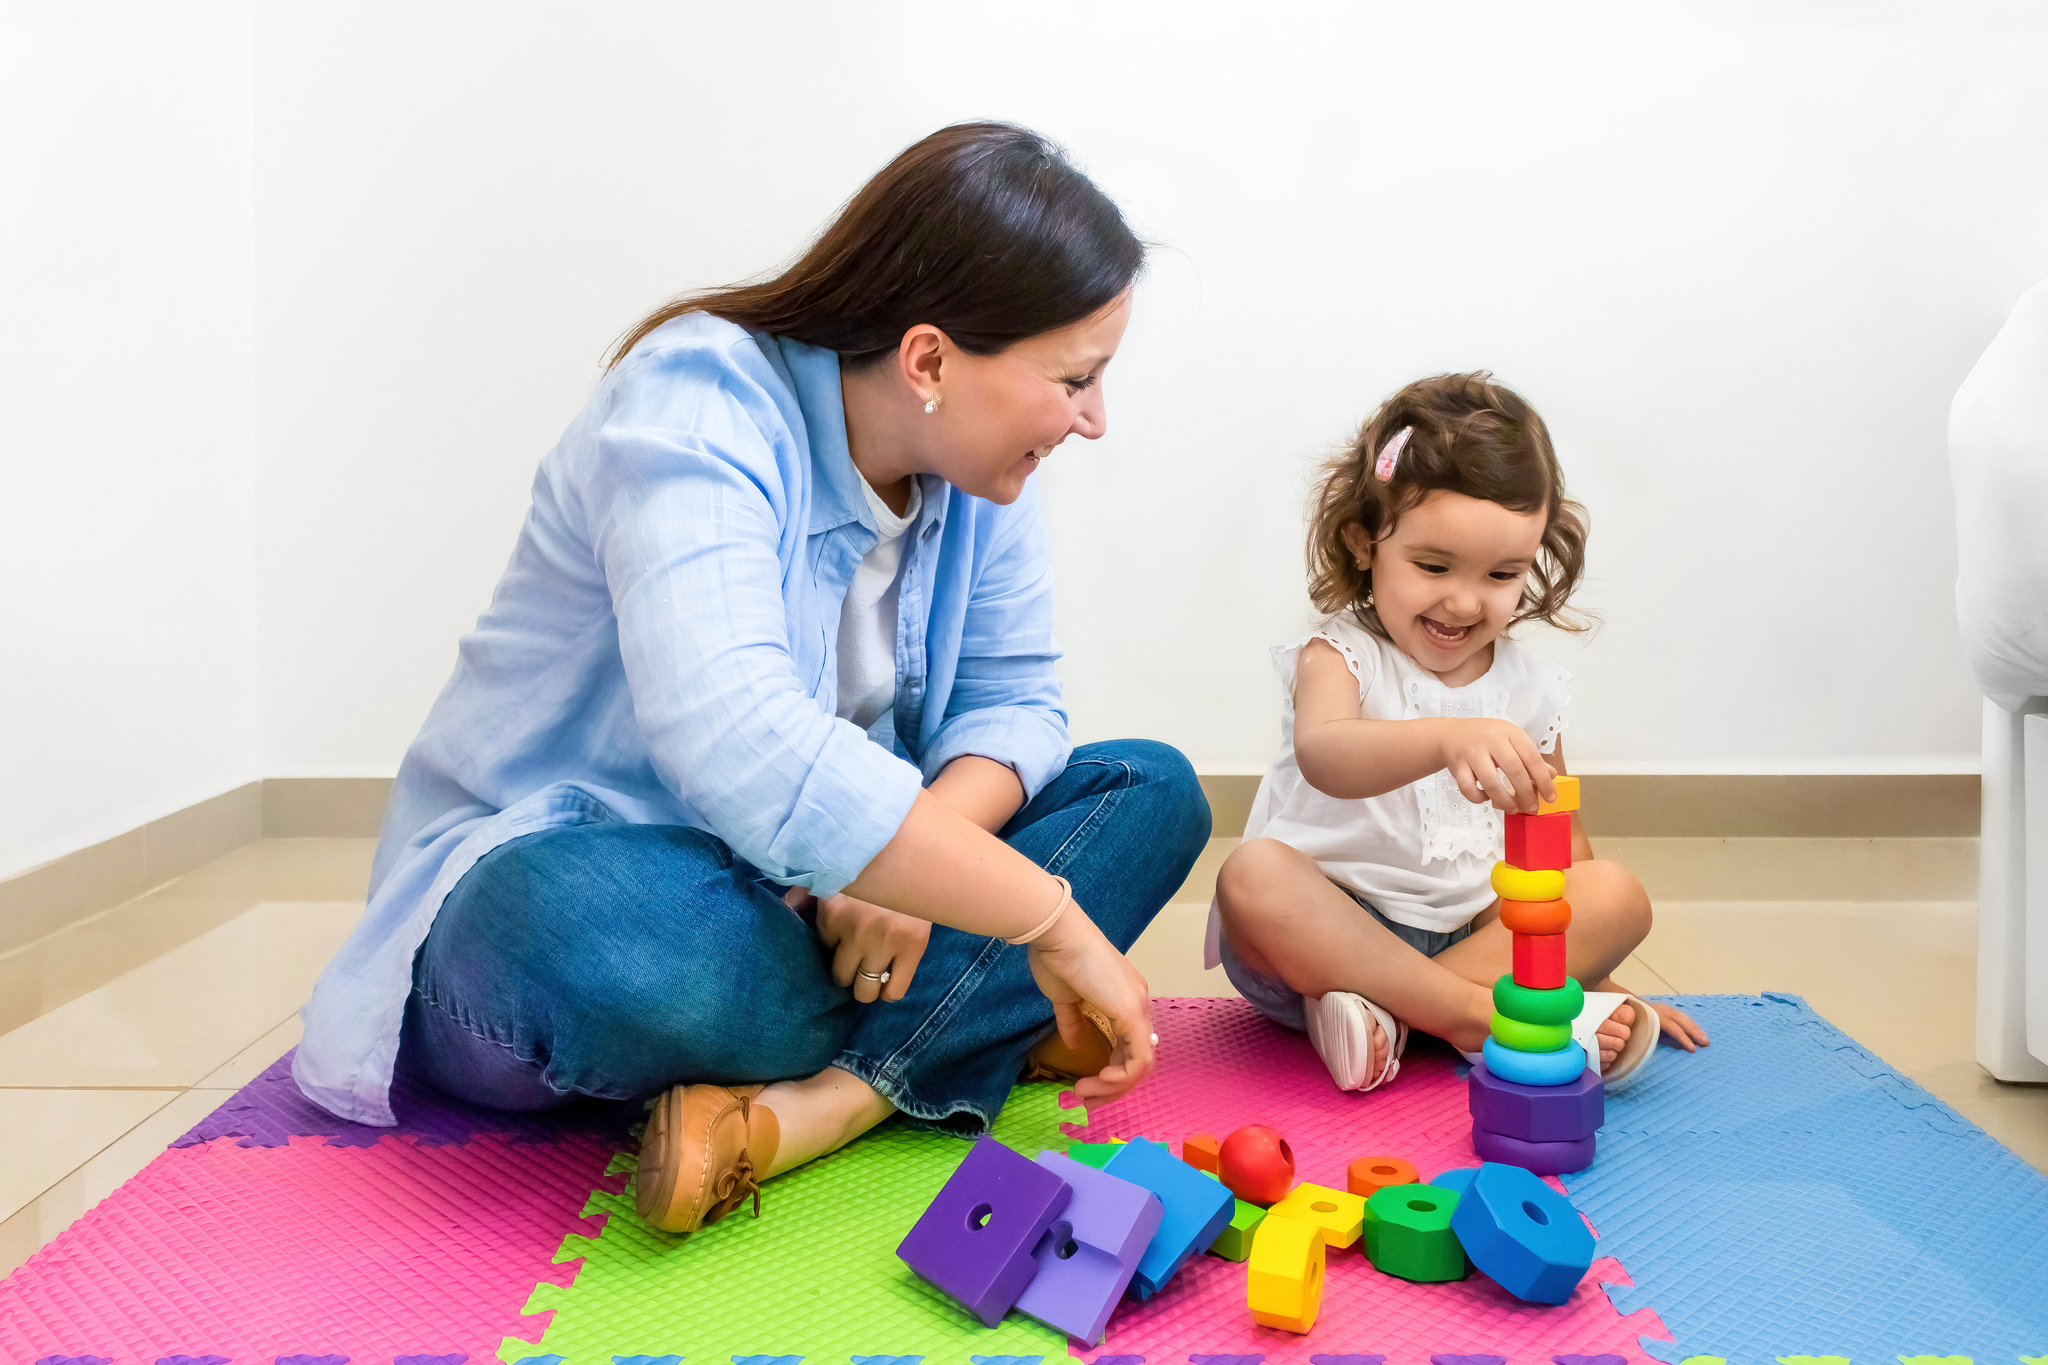 toddler daycare adjustment: Mom plays with toddler